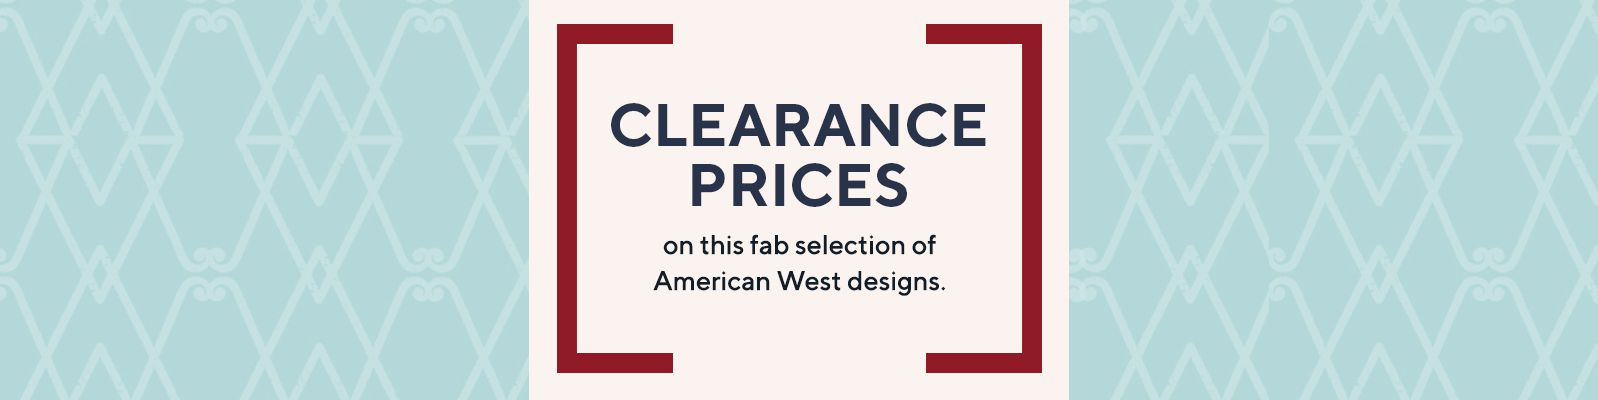 Clearance Prices on this fab selection of American West designs.